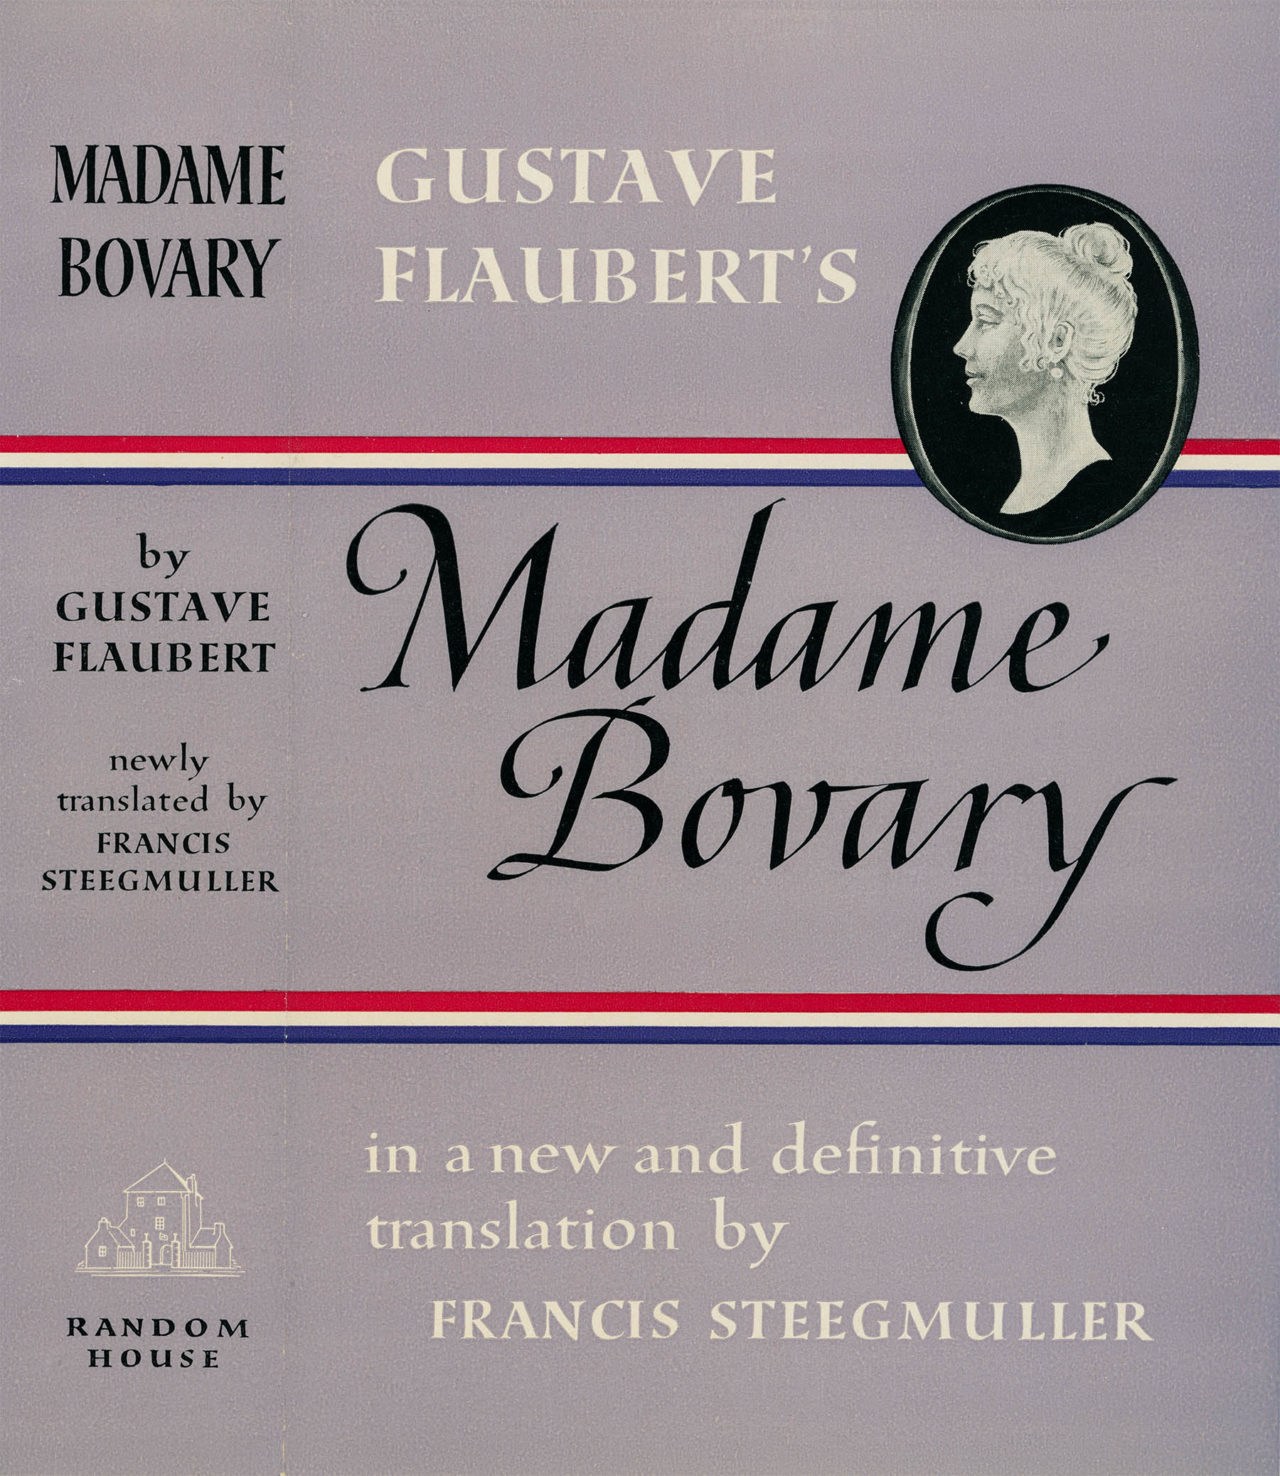 Book jacket of Madame Bovary